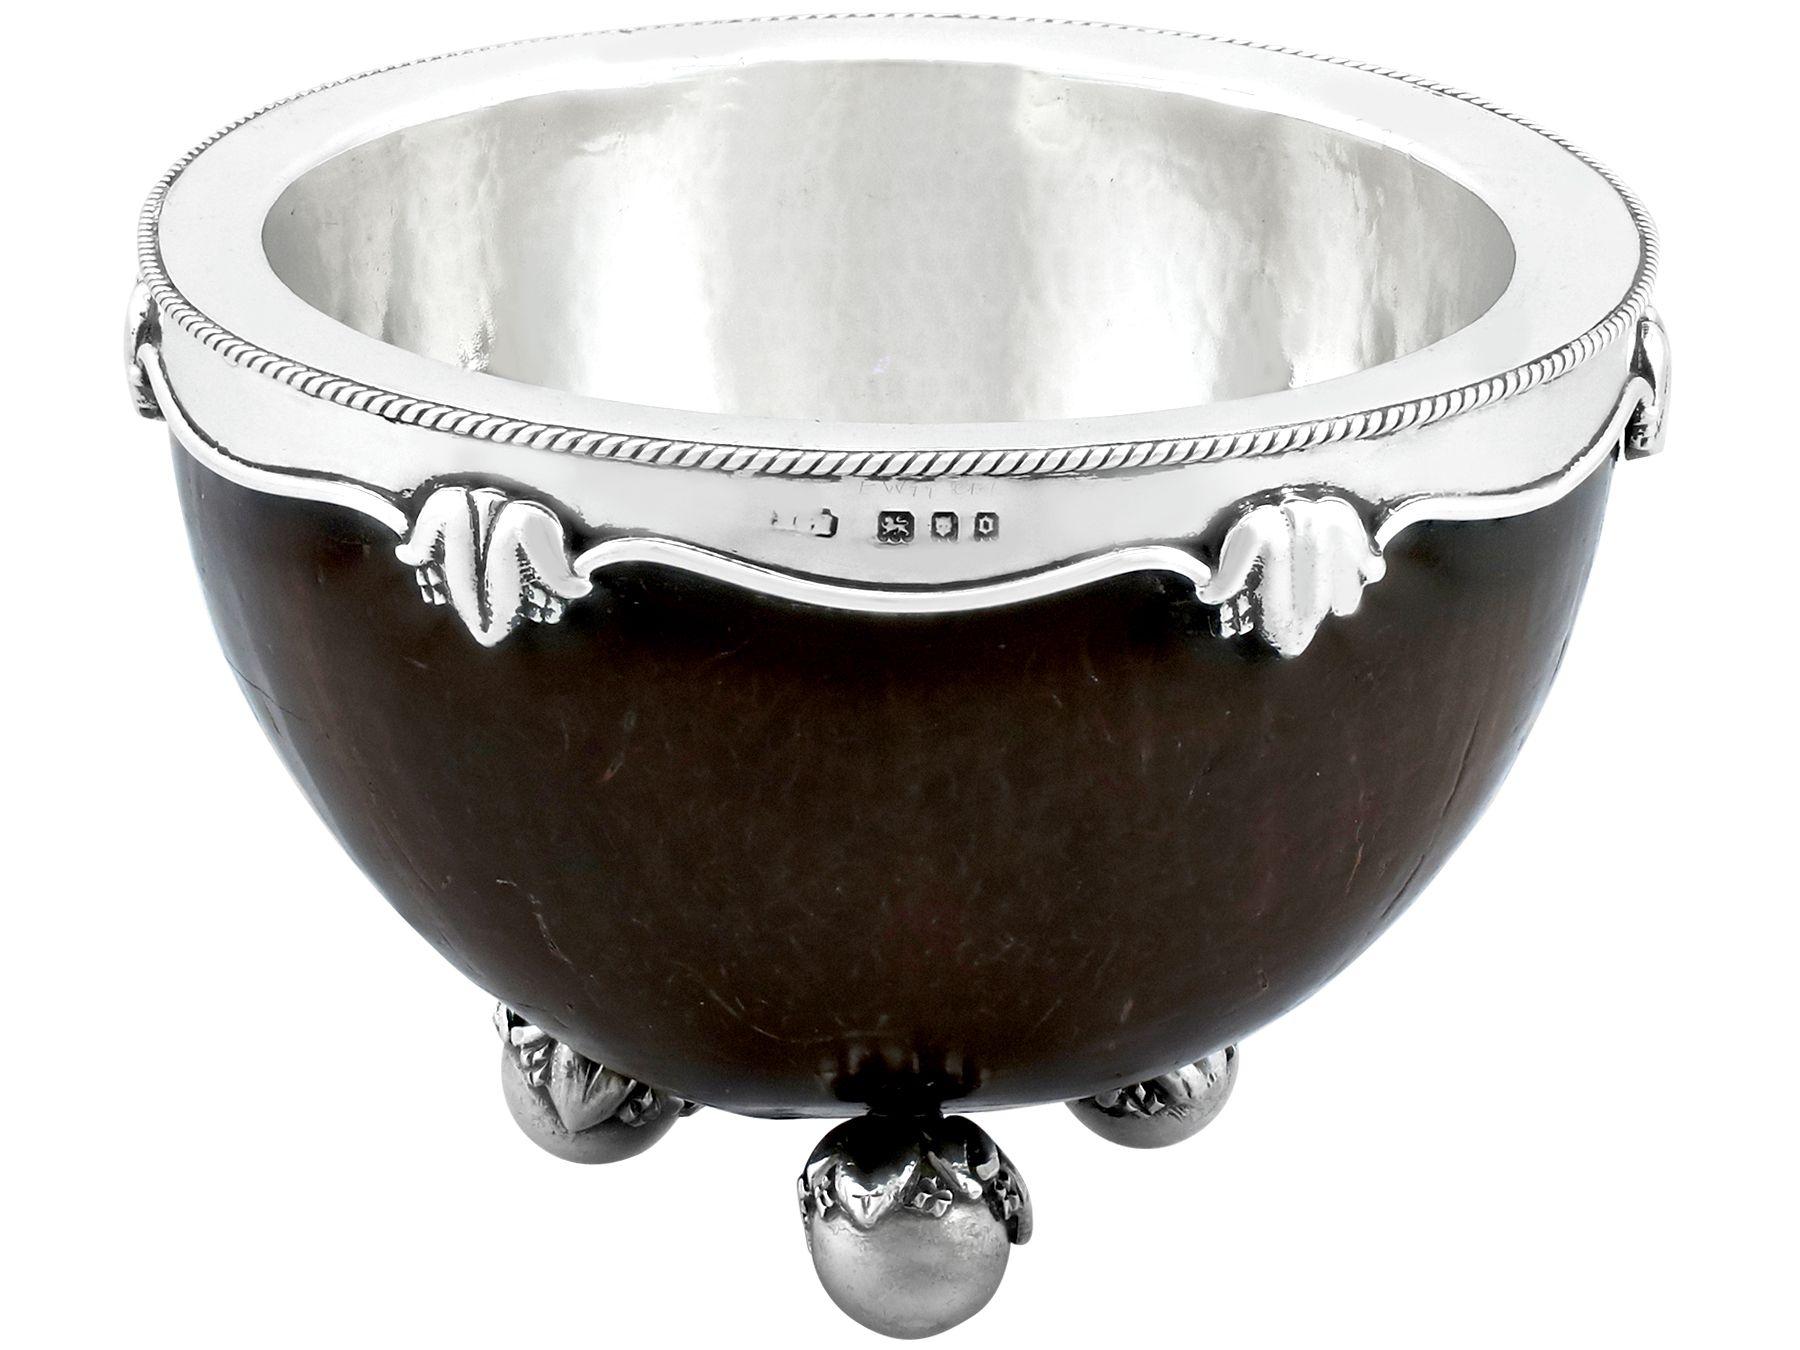 An exceptional, fine and impressive antique George V English sterling silver mounted coconut bowl in the Arts and Crafts style, made by Henry George Murphy; an addition to our diverse ornamental silverware collection.

This exceptional antique